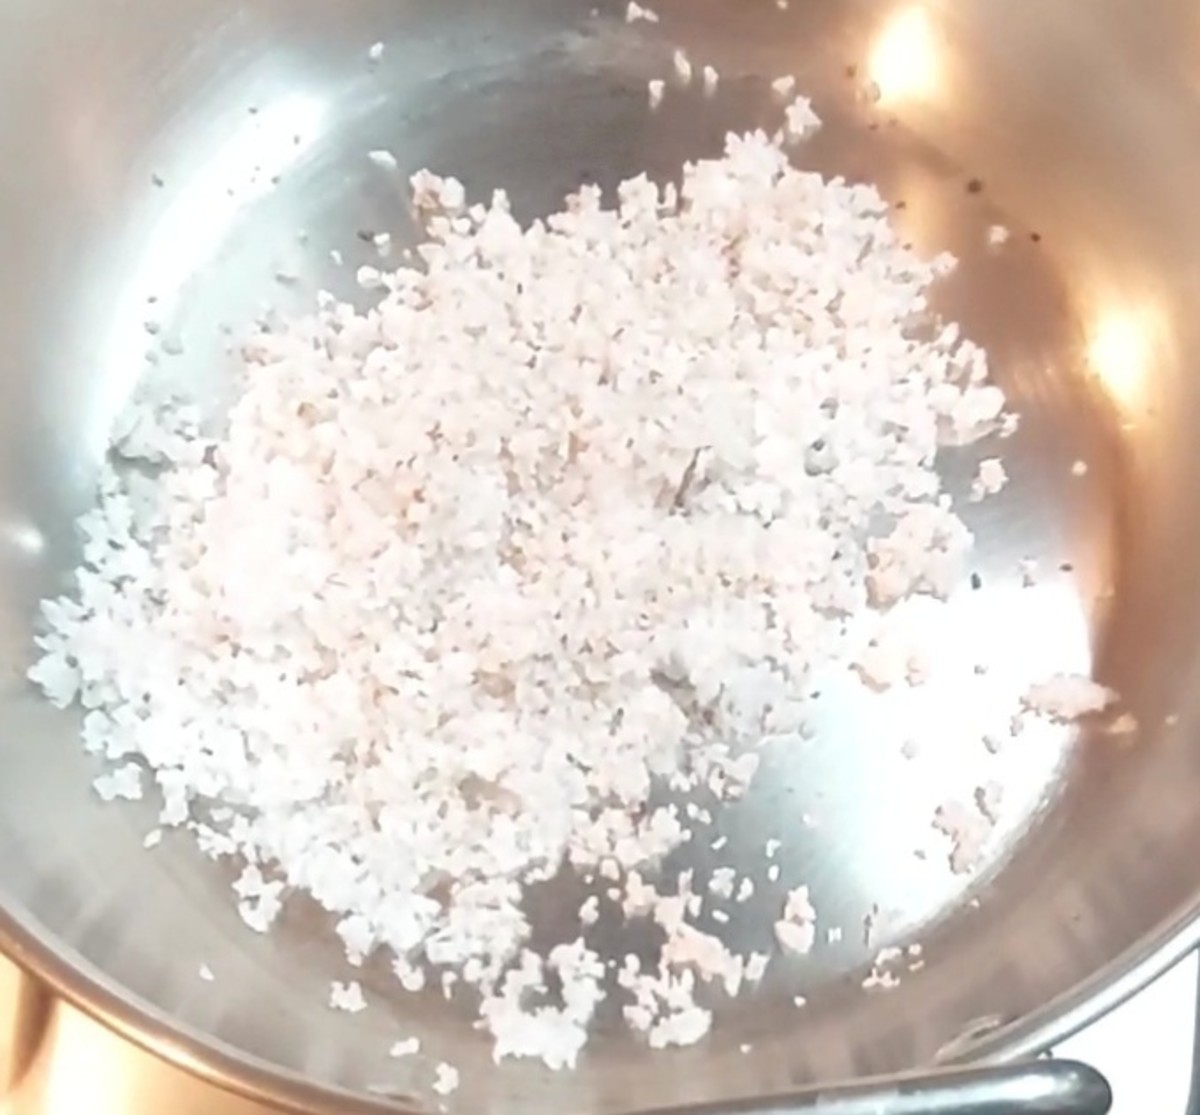 Add 1/2 cup grated coconut (fresh or dry).